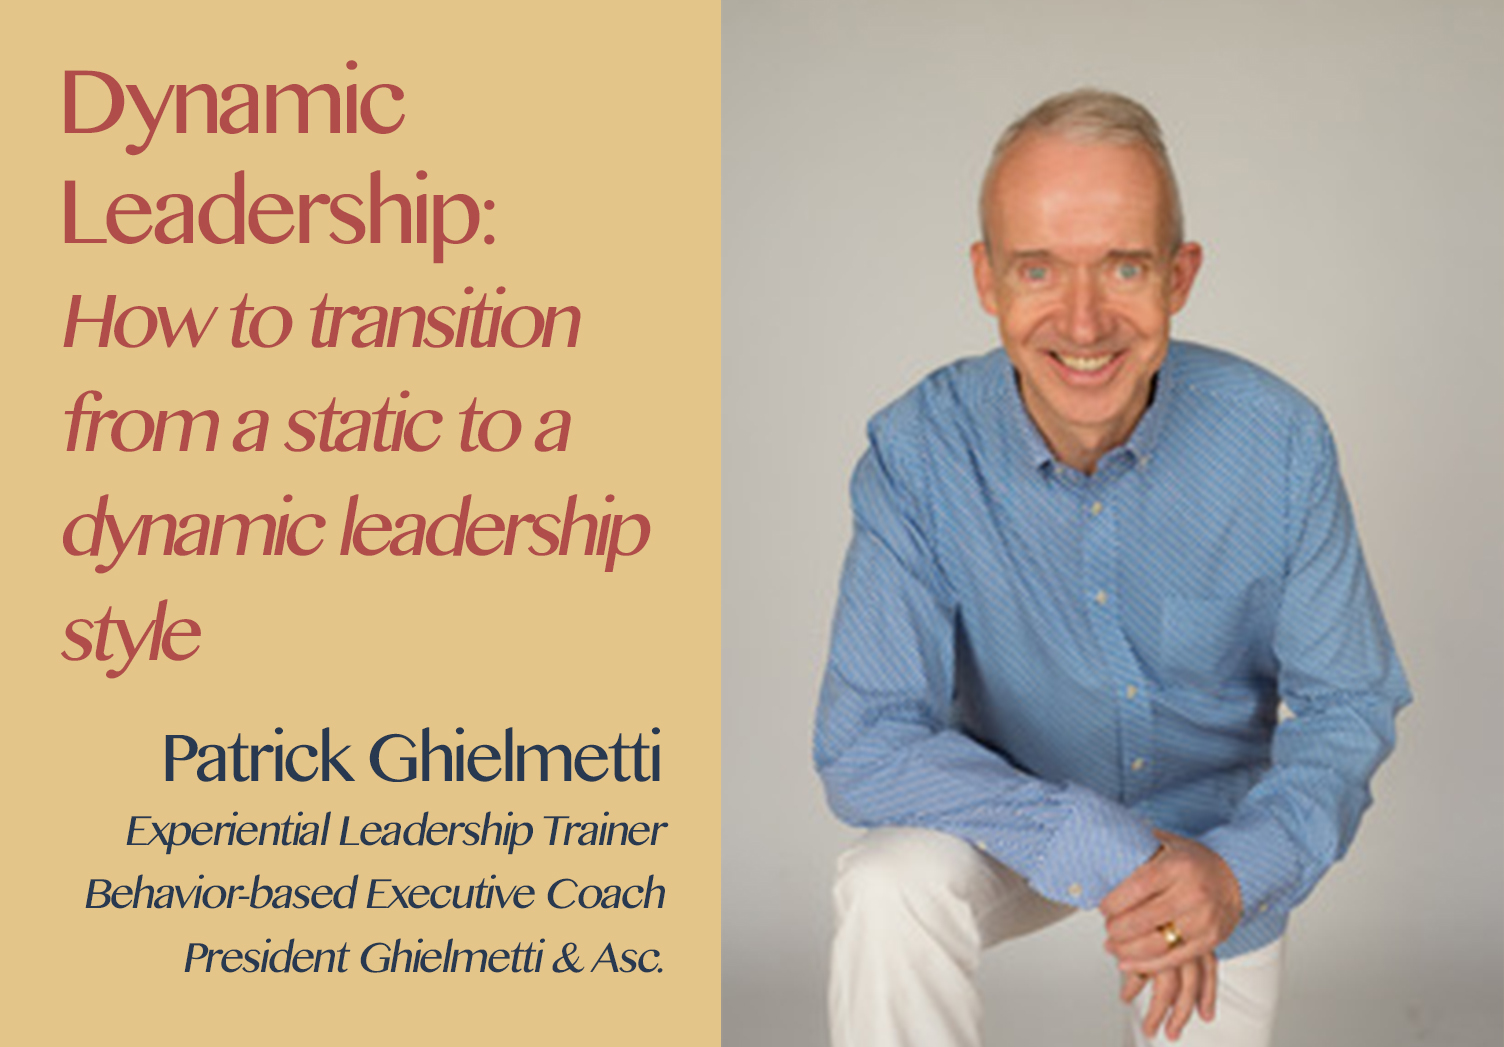 The Hospitality Resilience Series on Dynamic Leadership with Patrick Ghielmetti